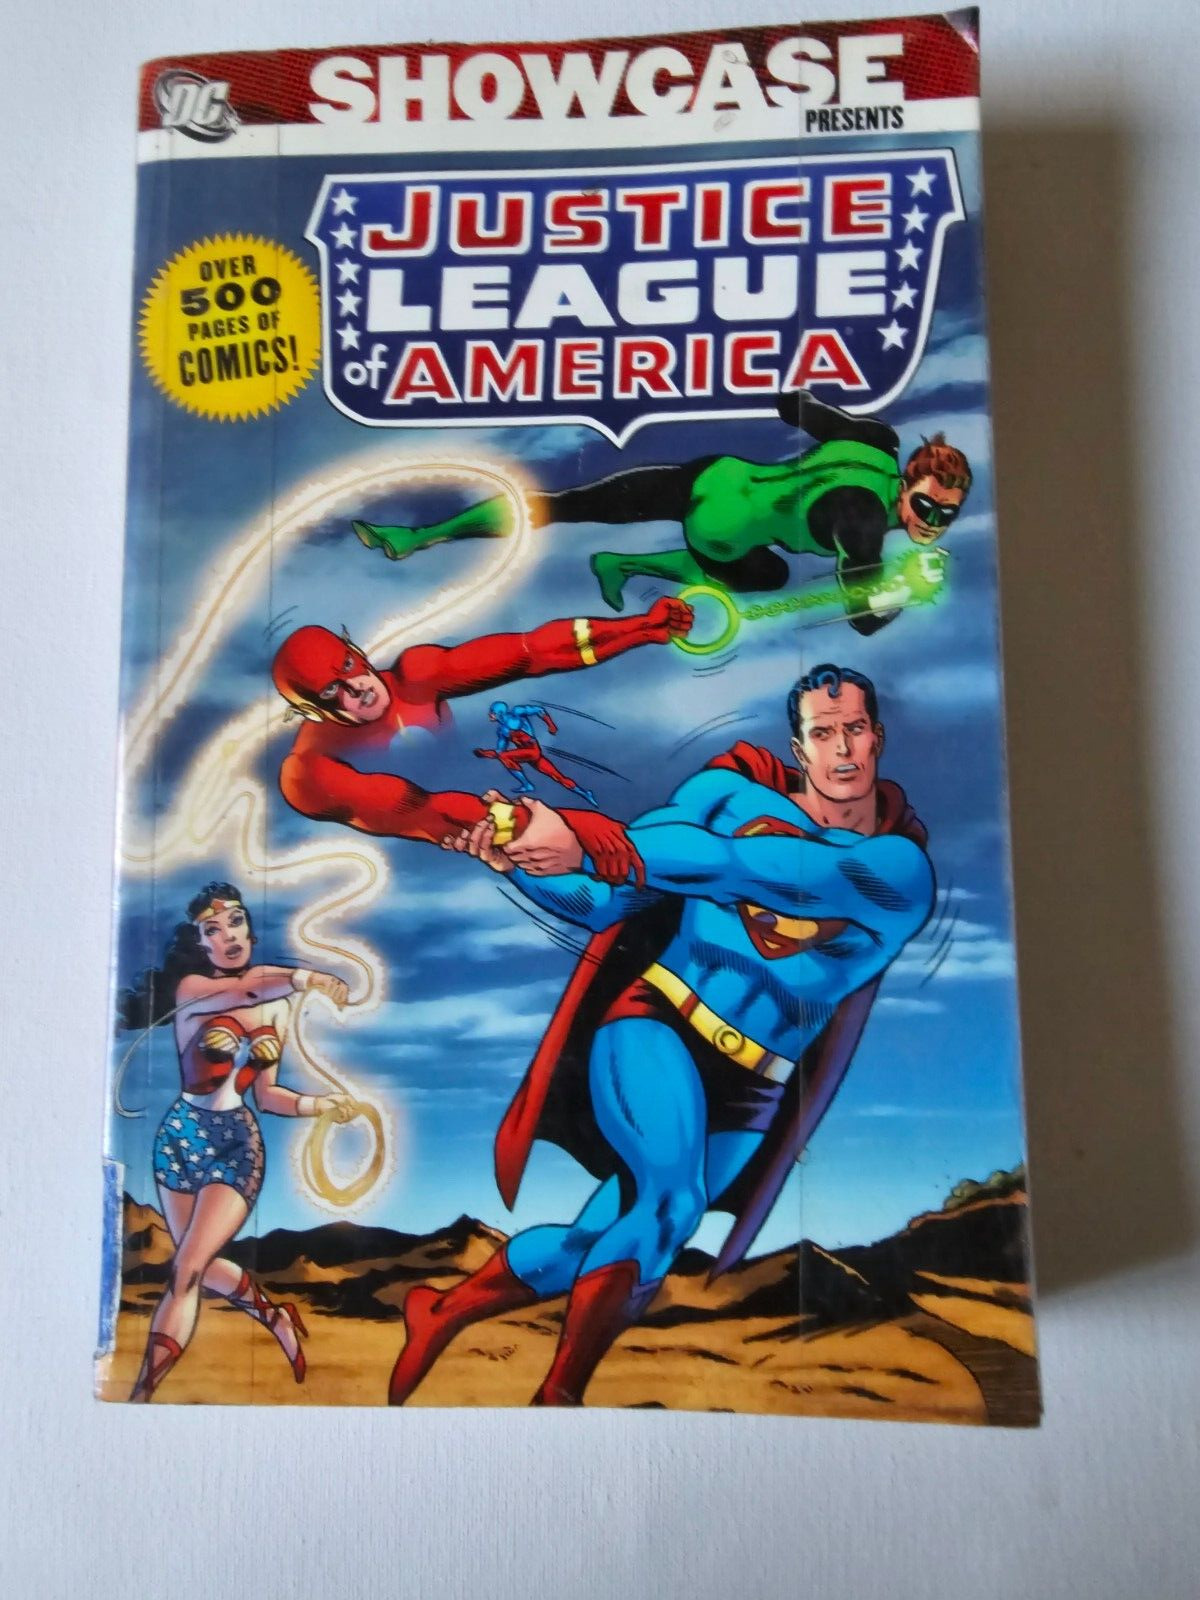 Showcase Presents Justice League of America Volume 2 (2007, DC), SC, 500+ pages